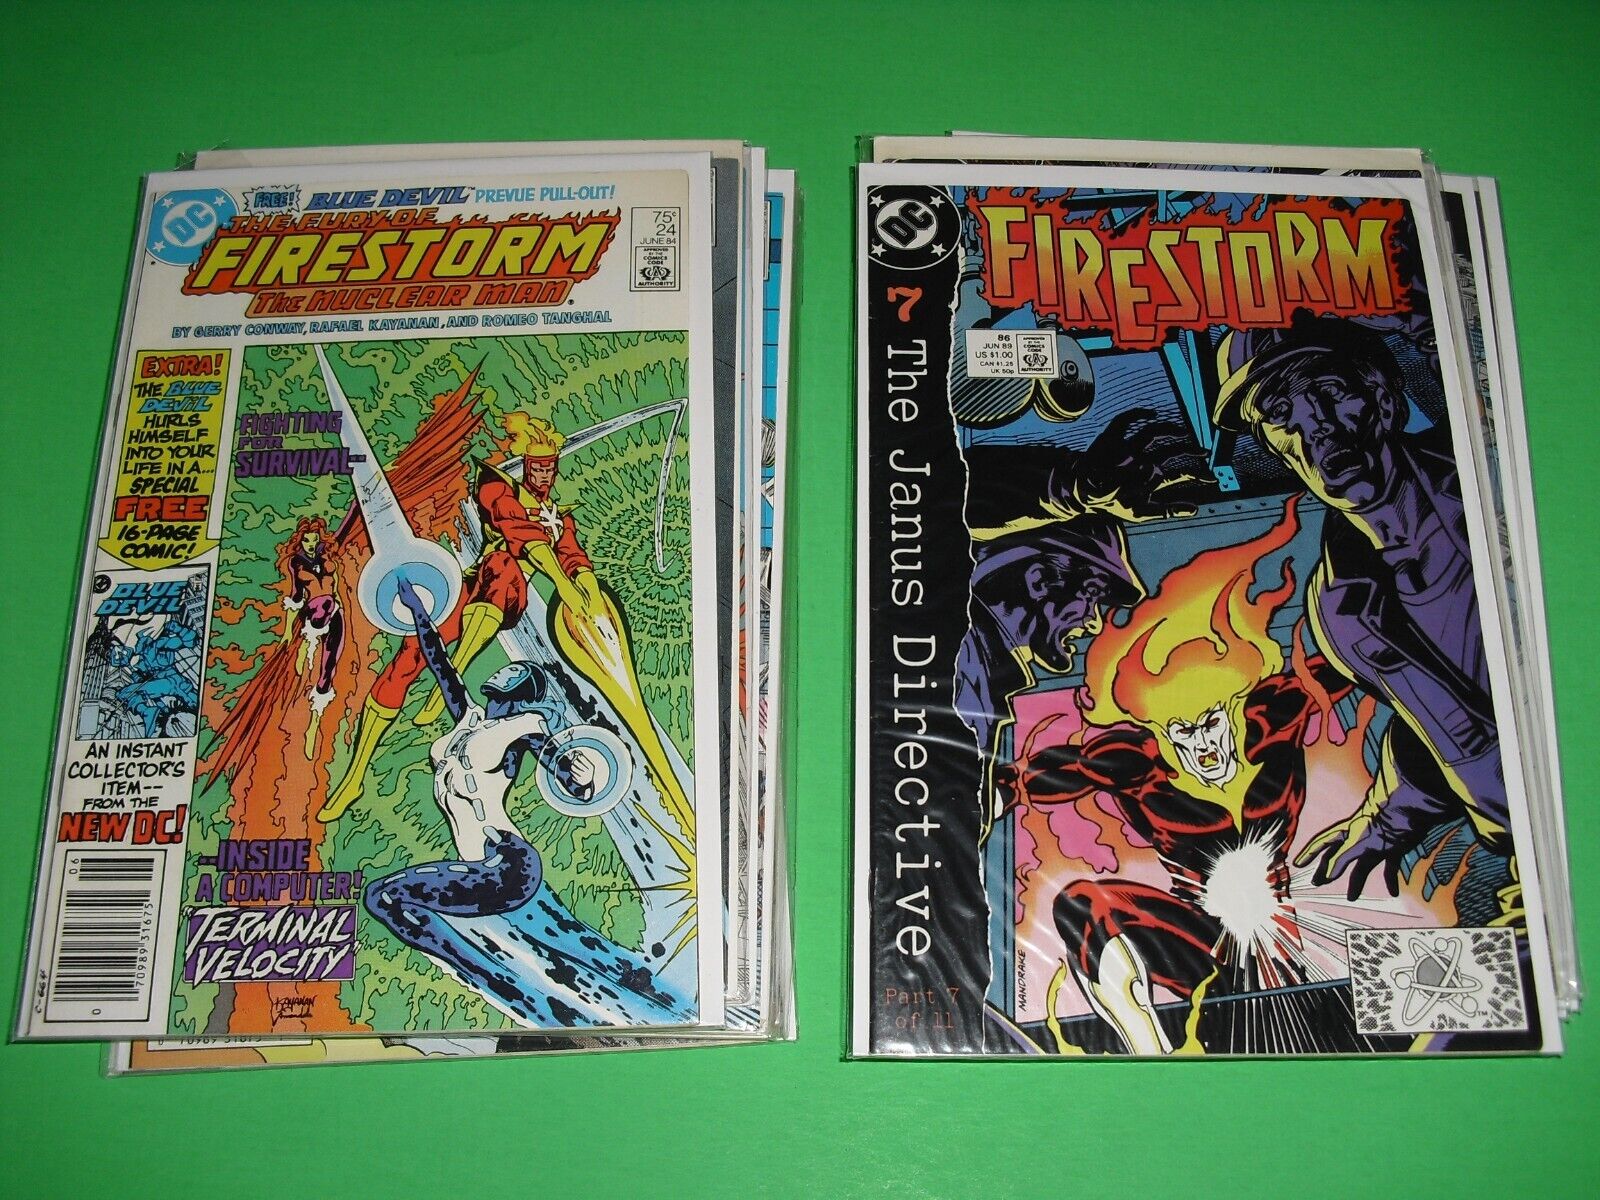 Lot 17 various Firestorm comics ranging from 24-100 most VF or better DC 1-100